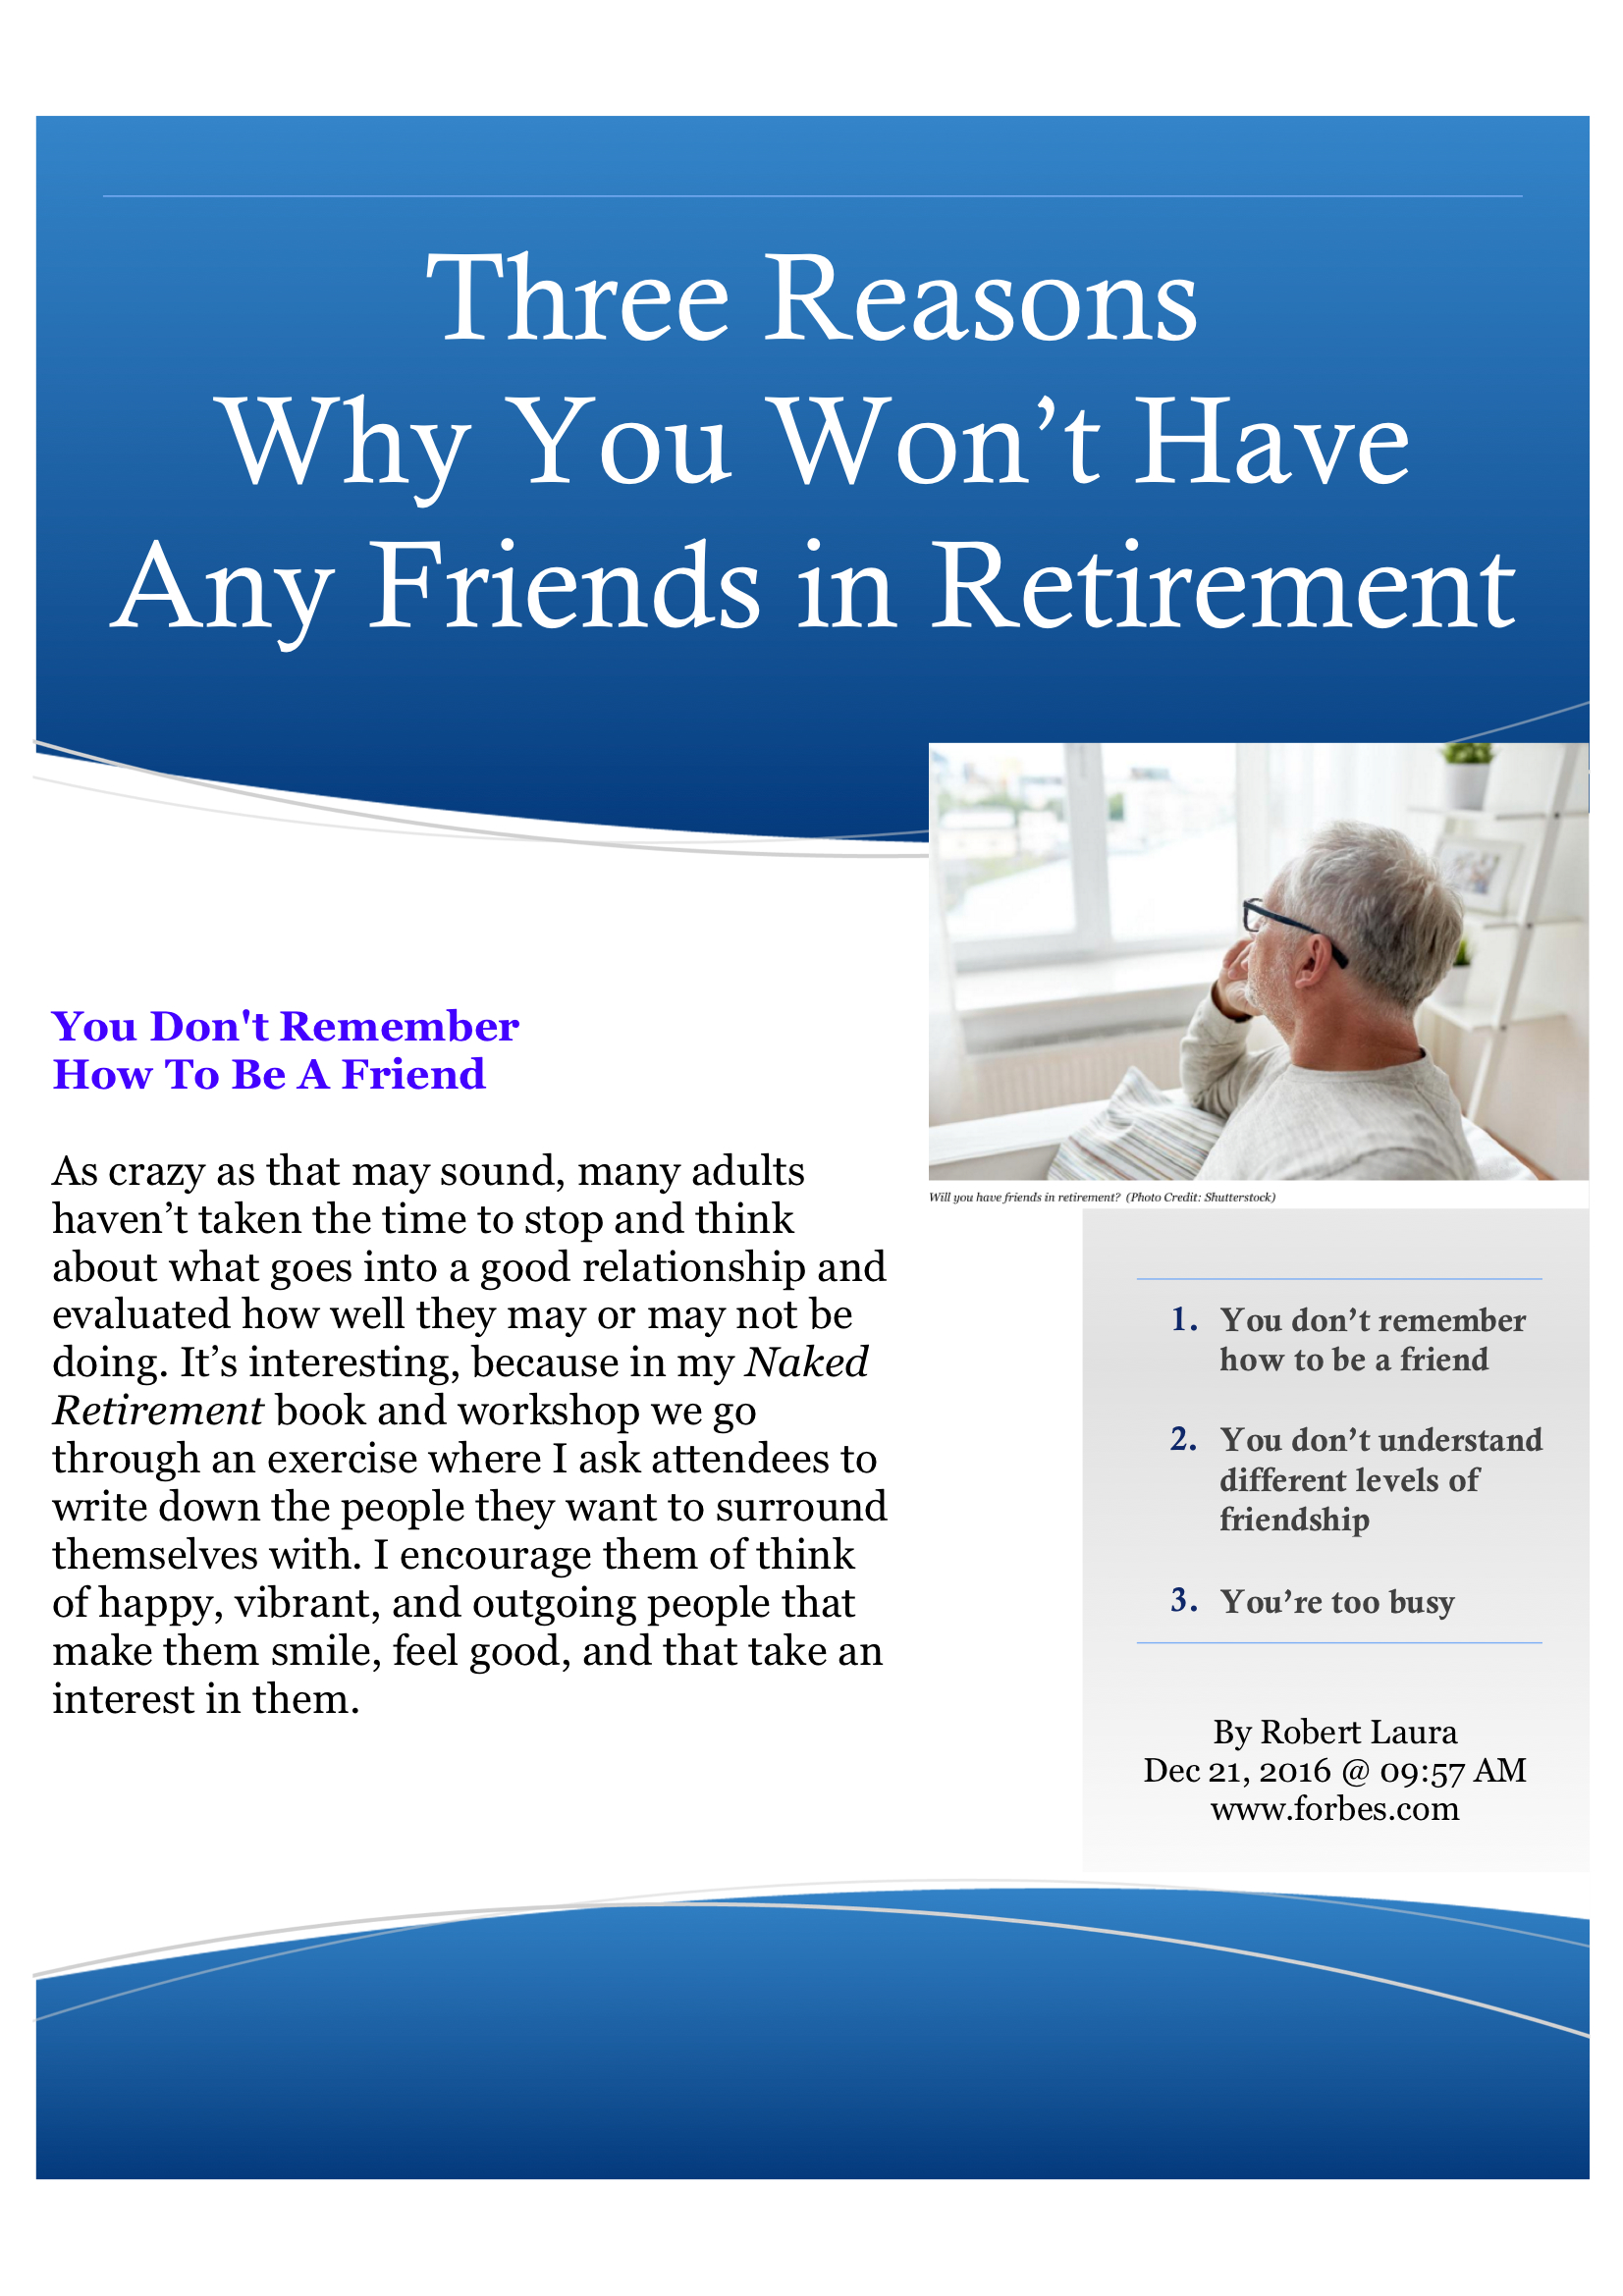 Three Reasons Why You Won’t Have Any Friends in Retirement